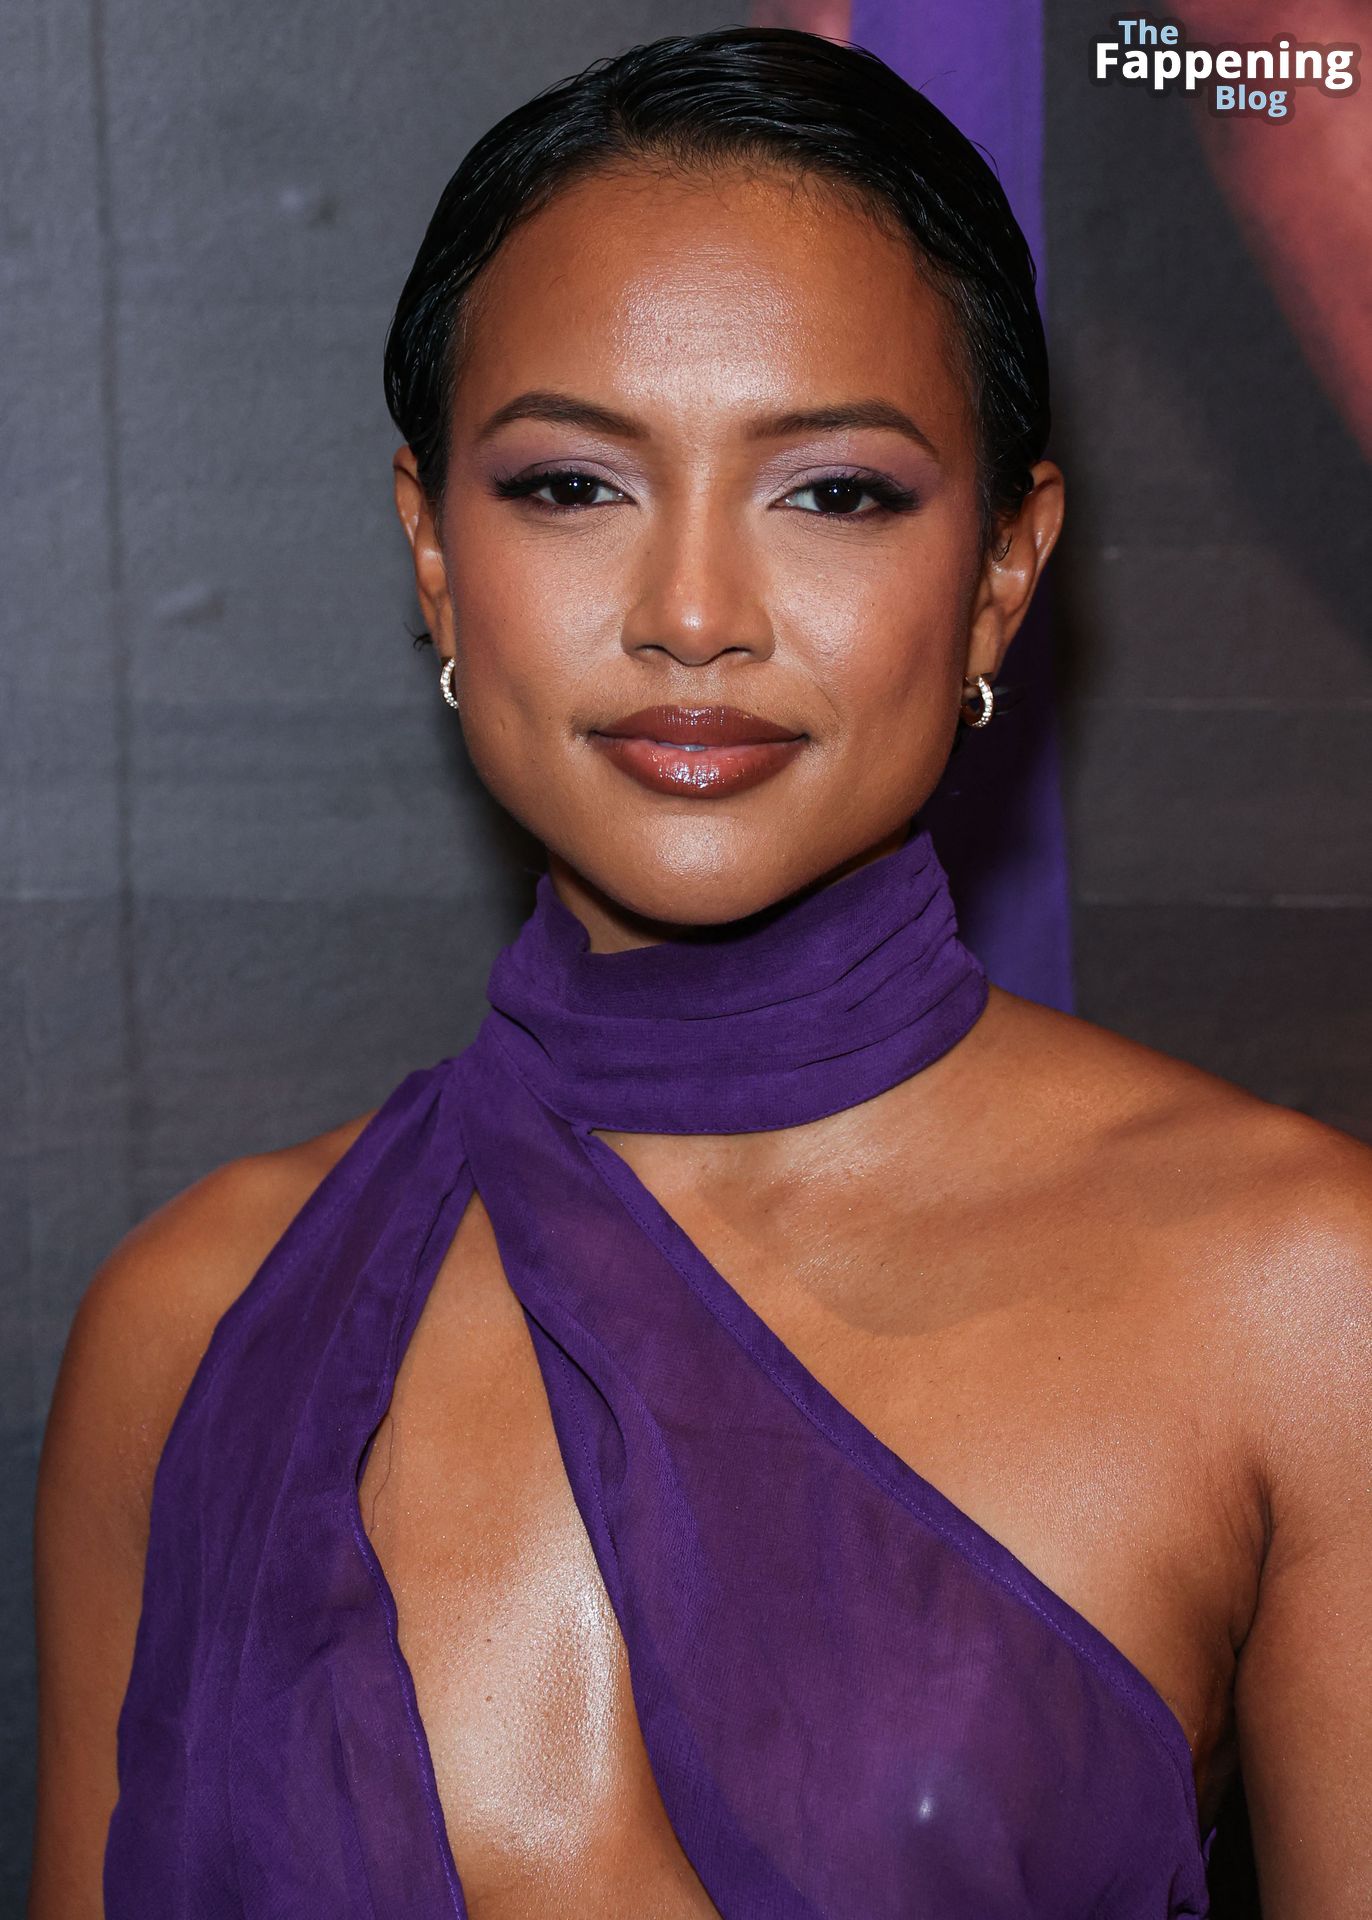 Karrueche Tran Poses Braless at the PrettyLittleThing X Lori Harvey Party Wear Collection Launch (17 Photos)